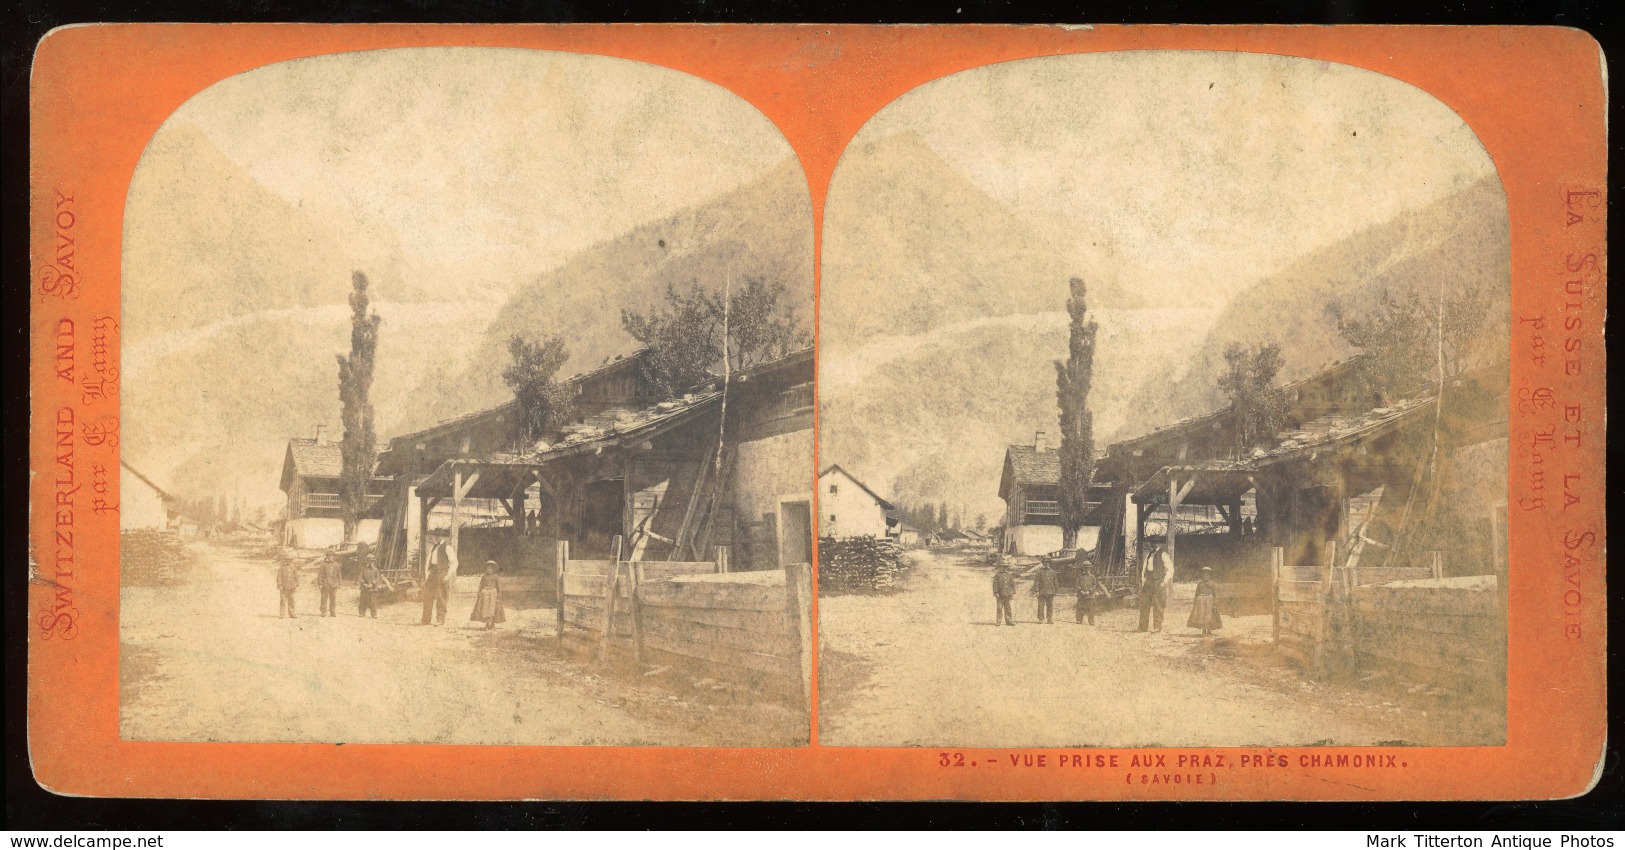 Stereoview - Chamonix, The Alps (Savoie) - Stereoscopes - Side-by-side Viewers